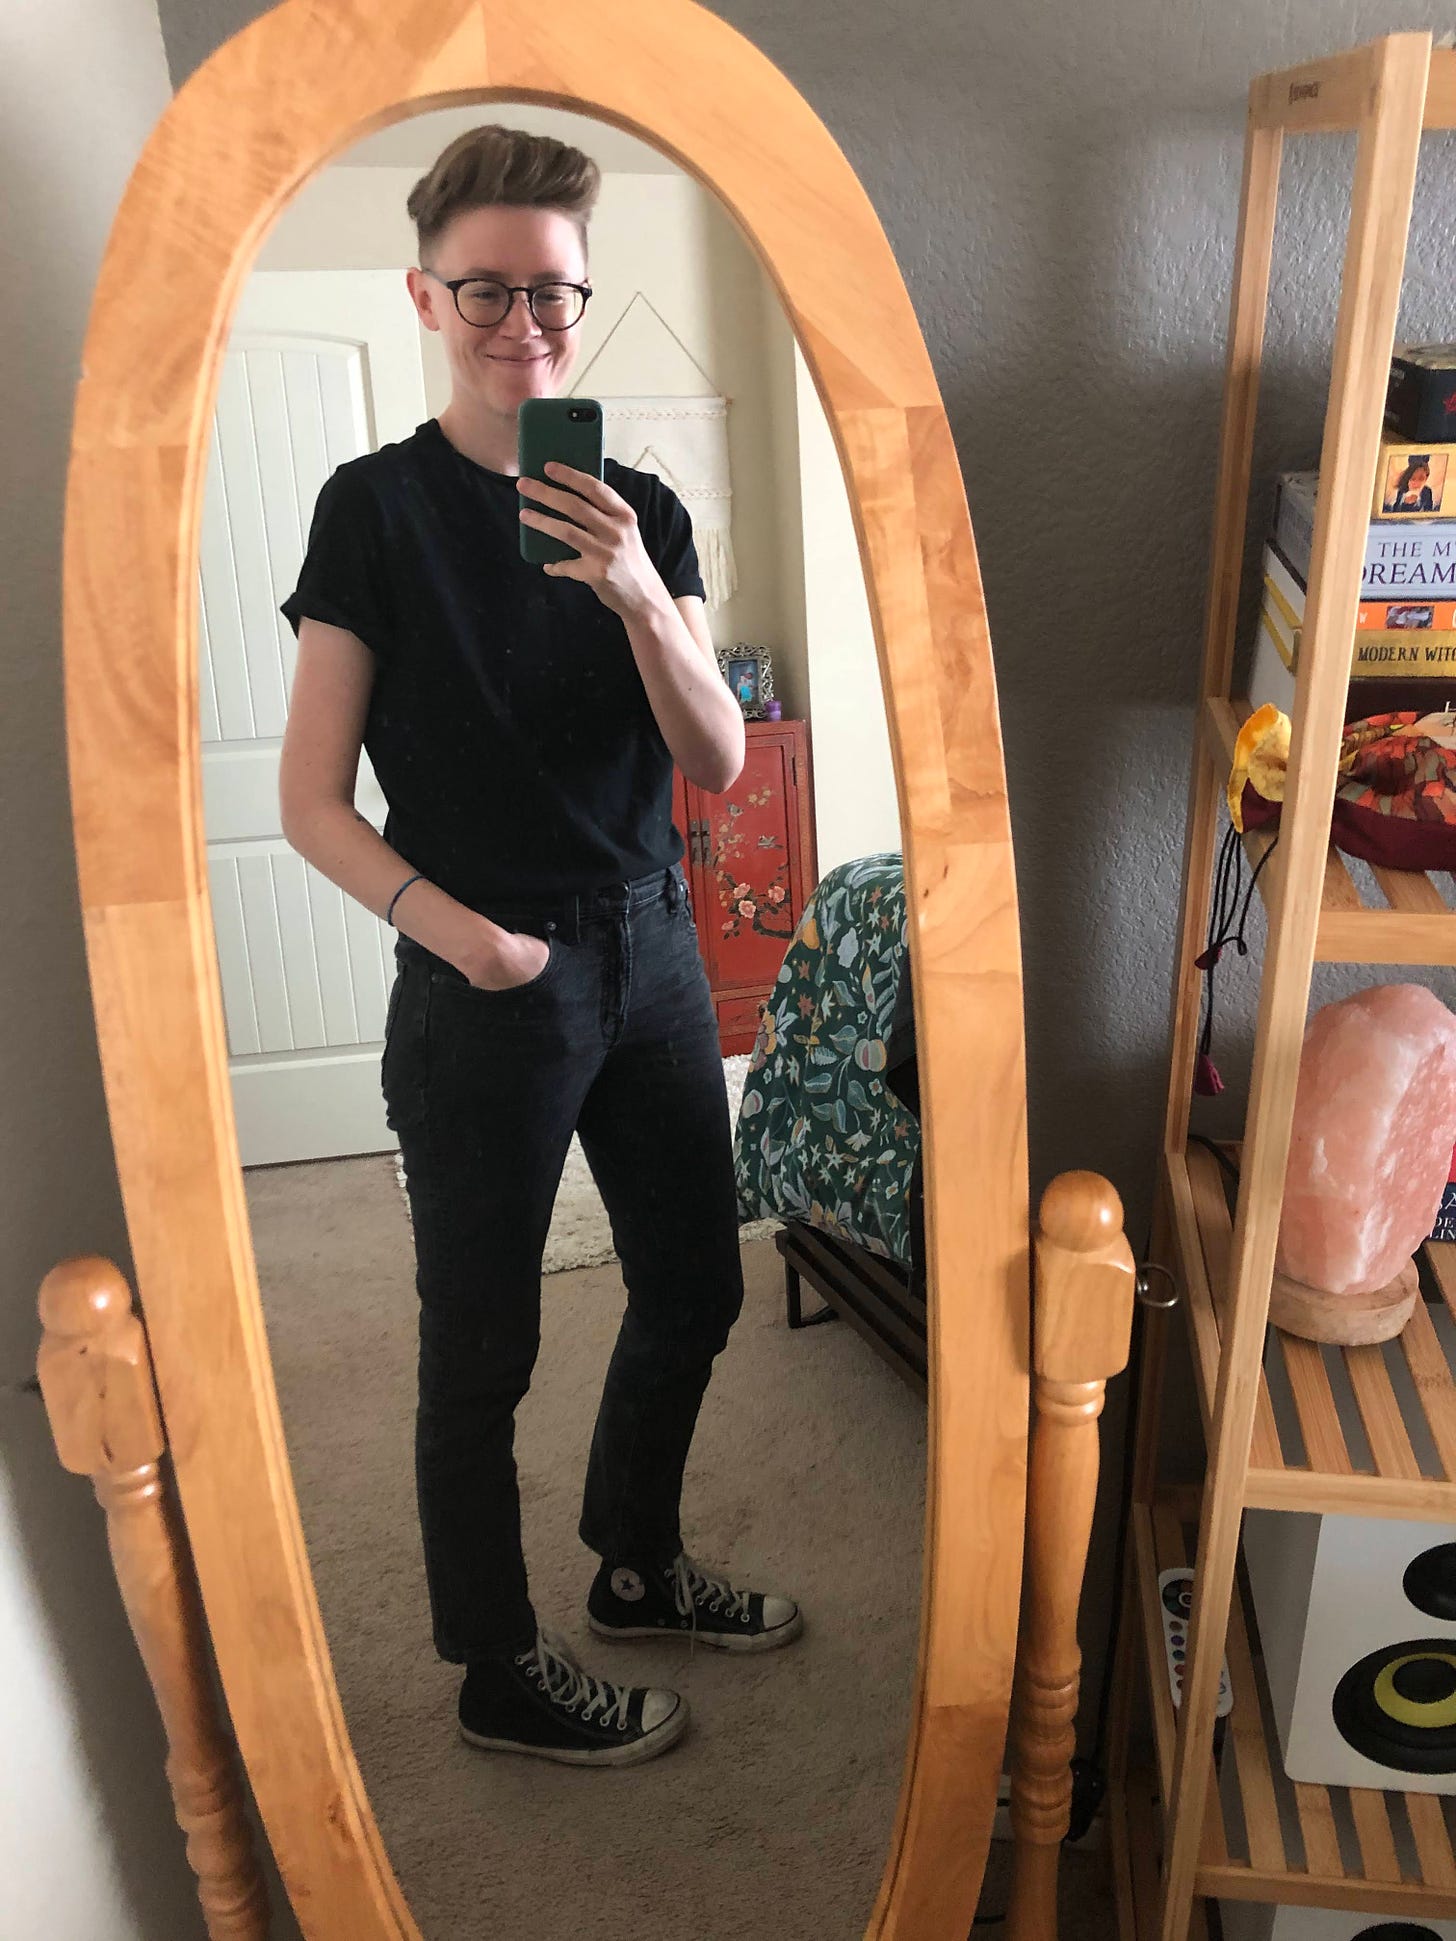 Caley in all black t-shirt, jeans, and converse.